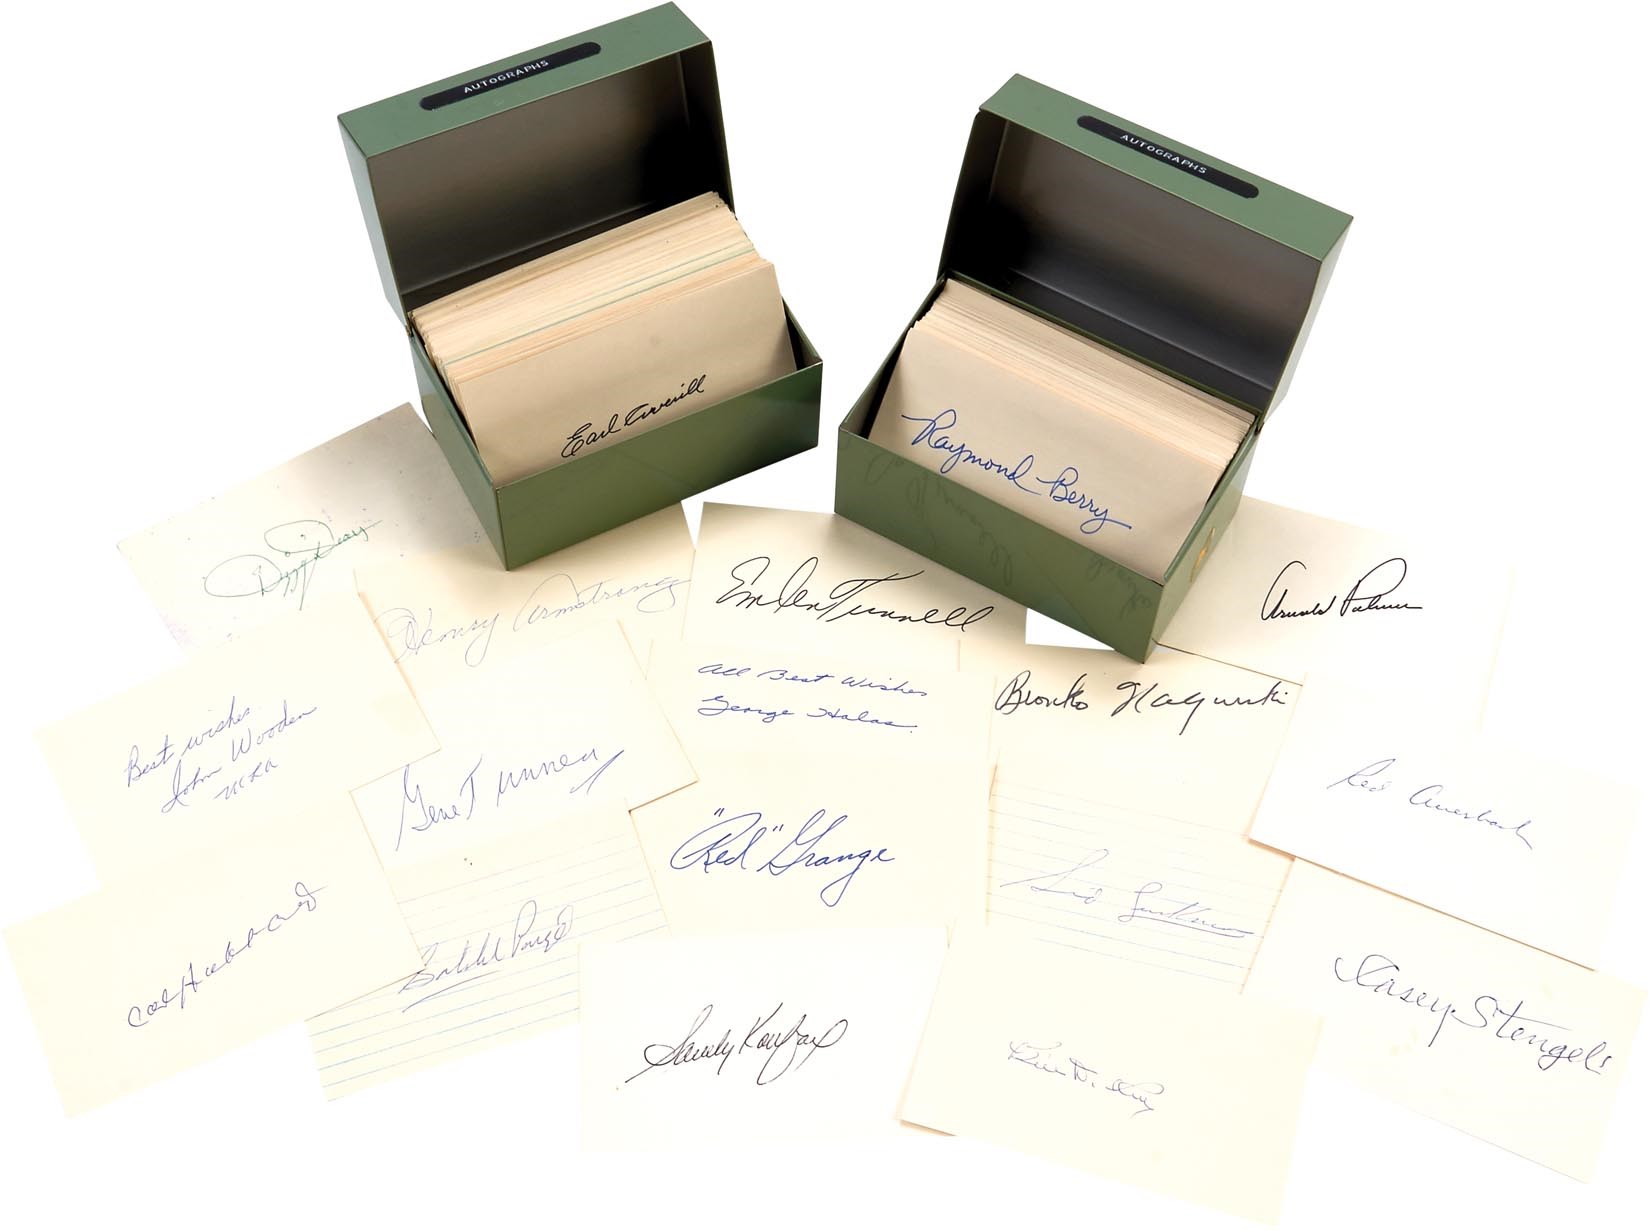 Baseball Autographs - Massive Multi-Sport Signed Index Card Collection w/Big Names & Rarities (385+)